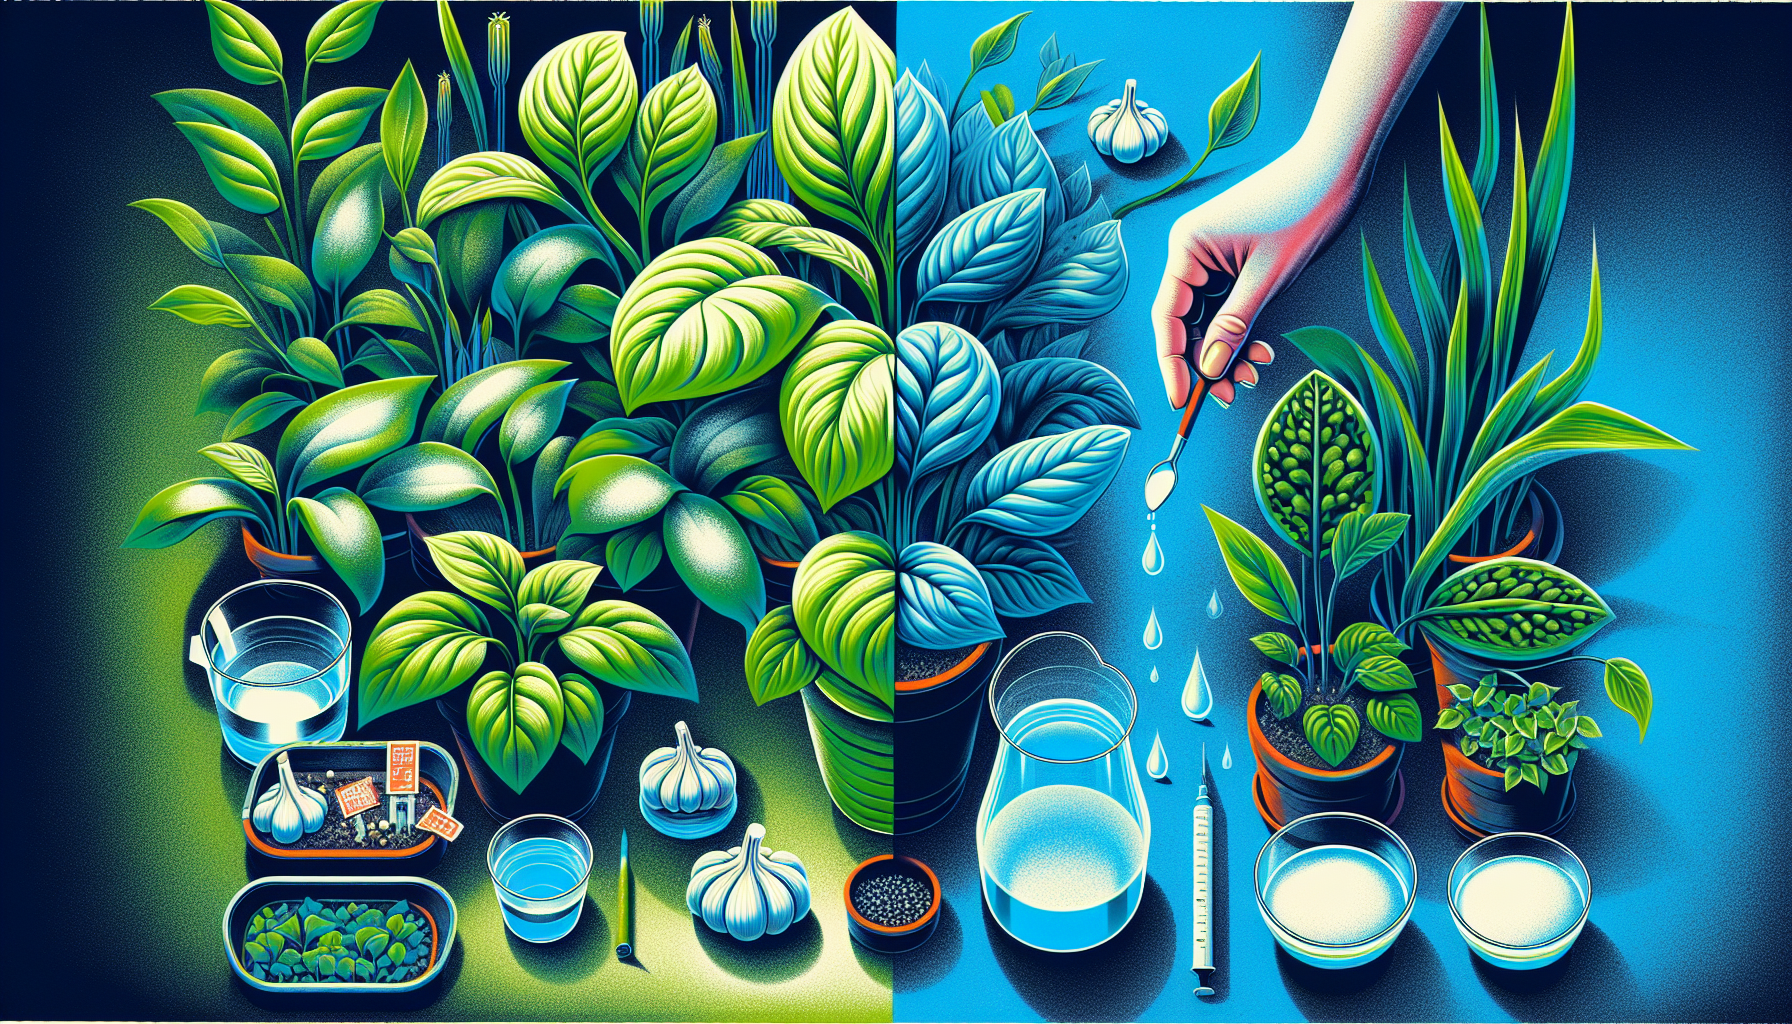 Creative illustration of natural remedies and chemical treatments for indoor plants